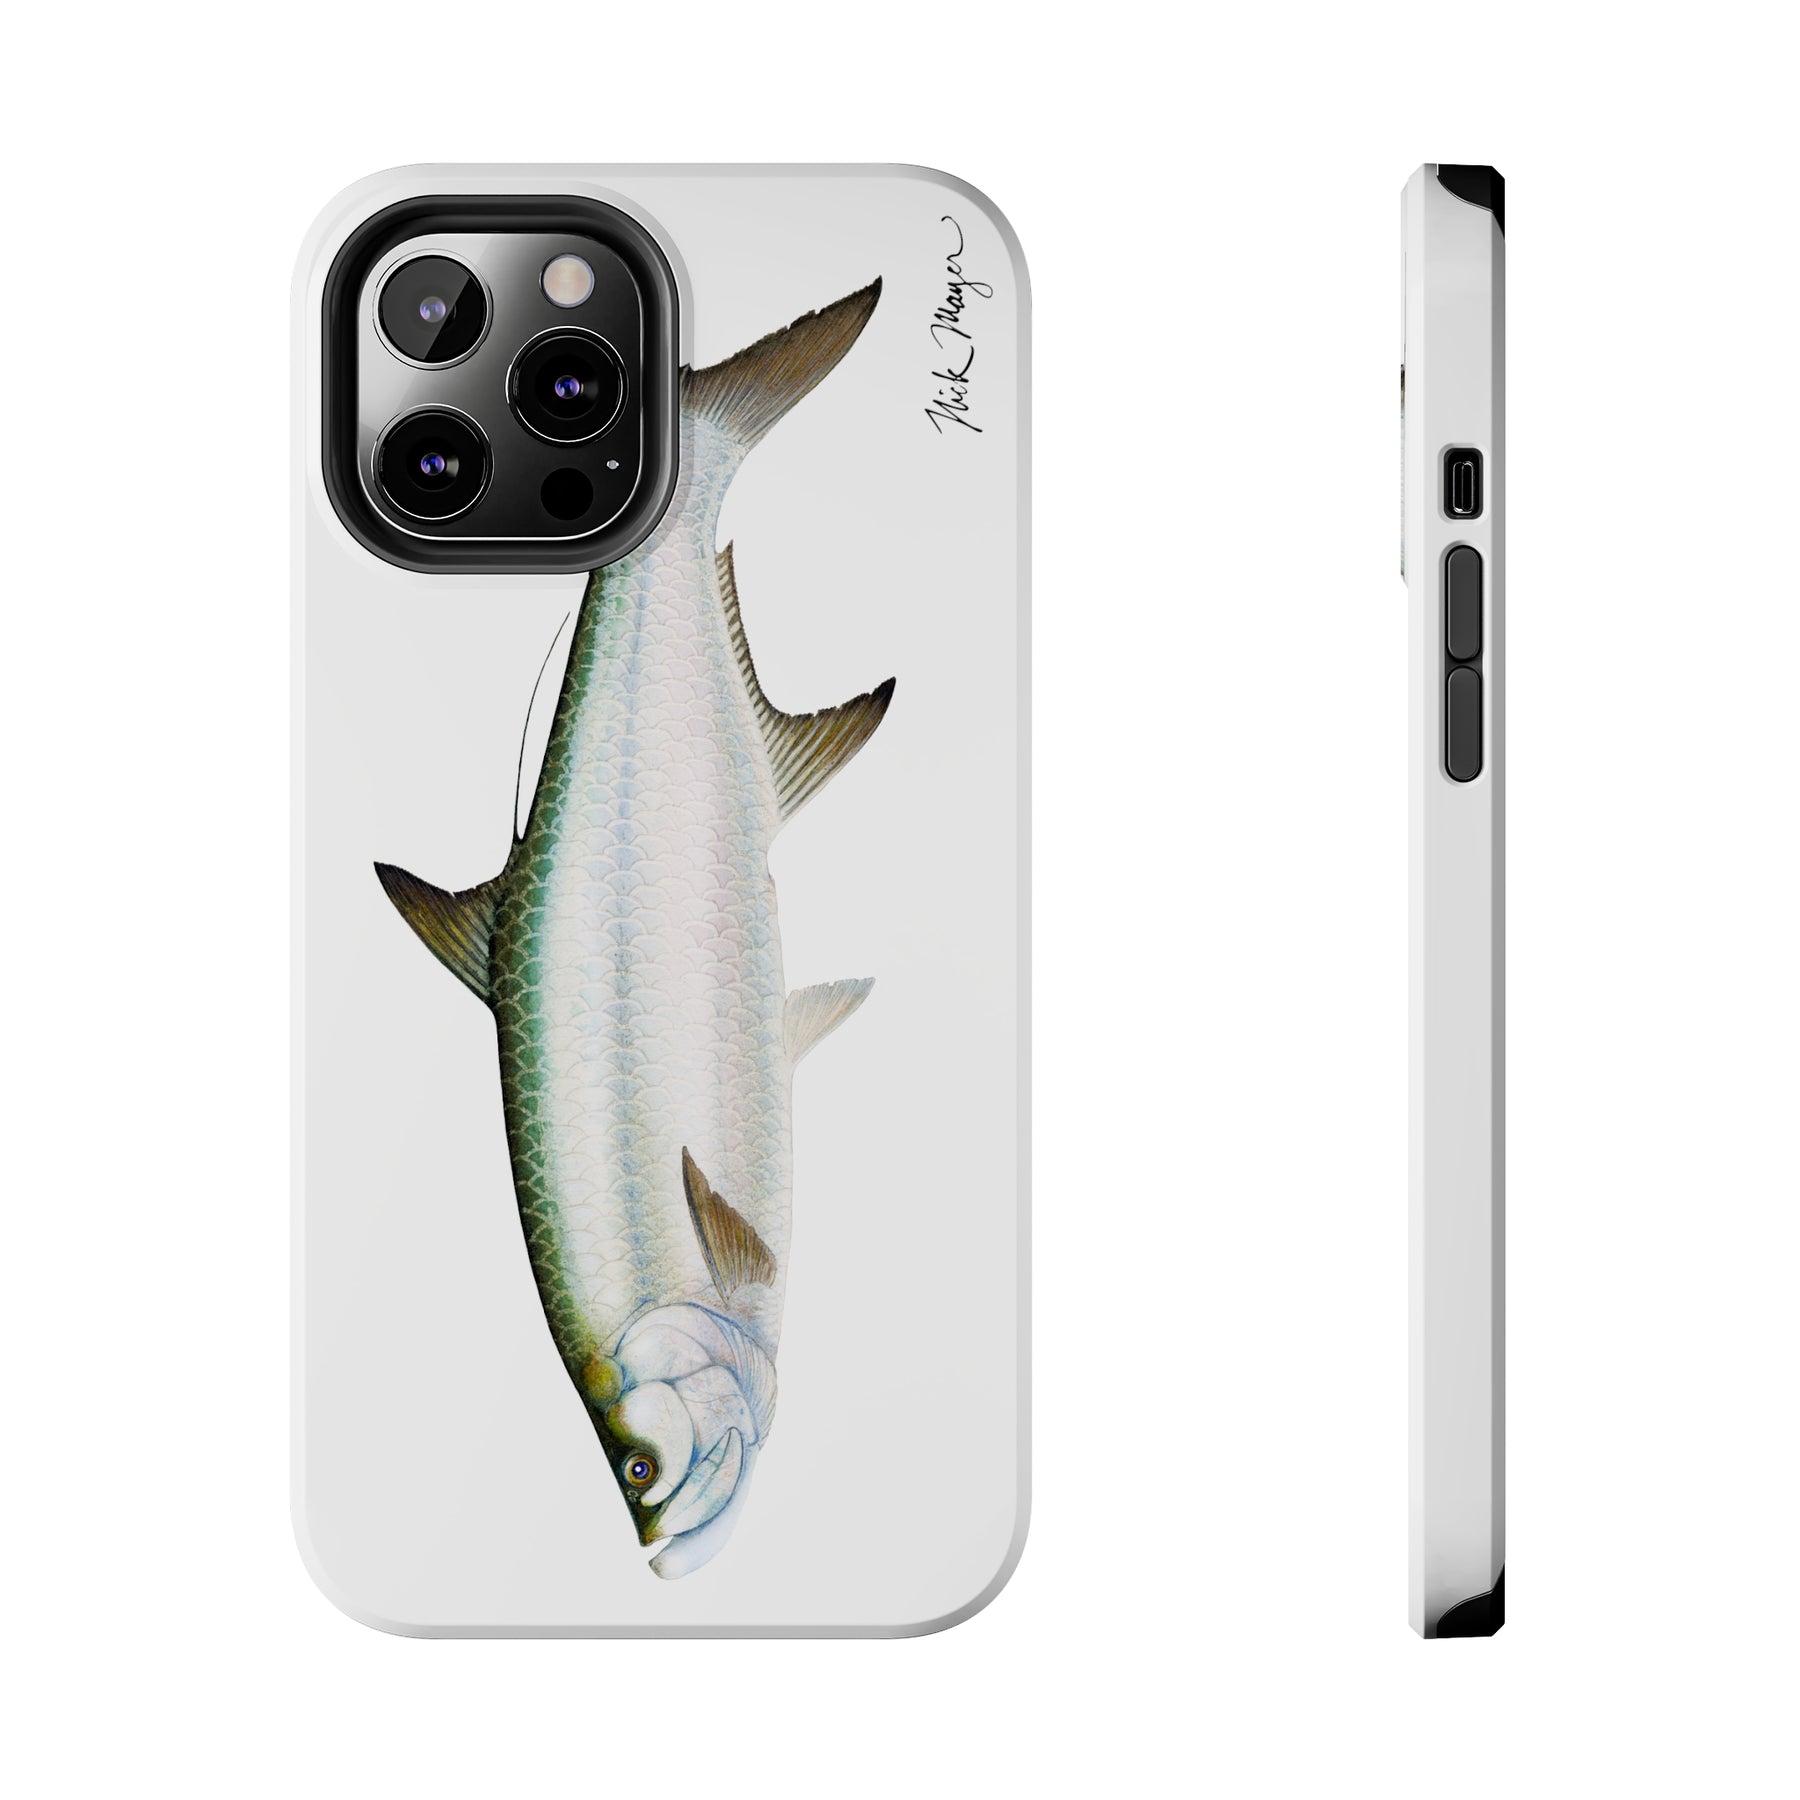 Tarpon Phone Case: Durable, Stylish Protection for iPhone